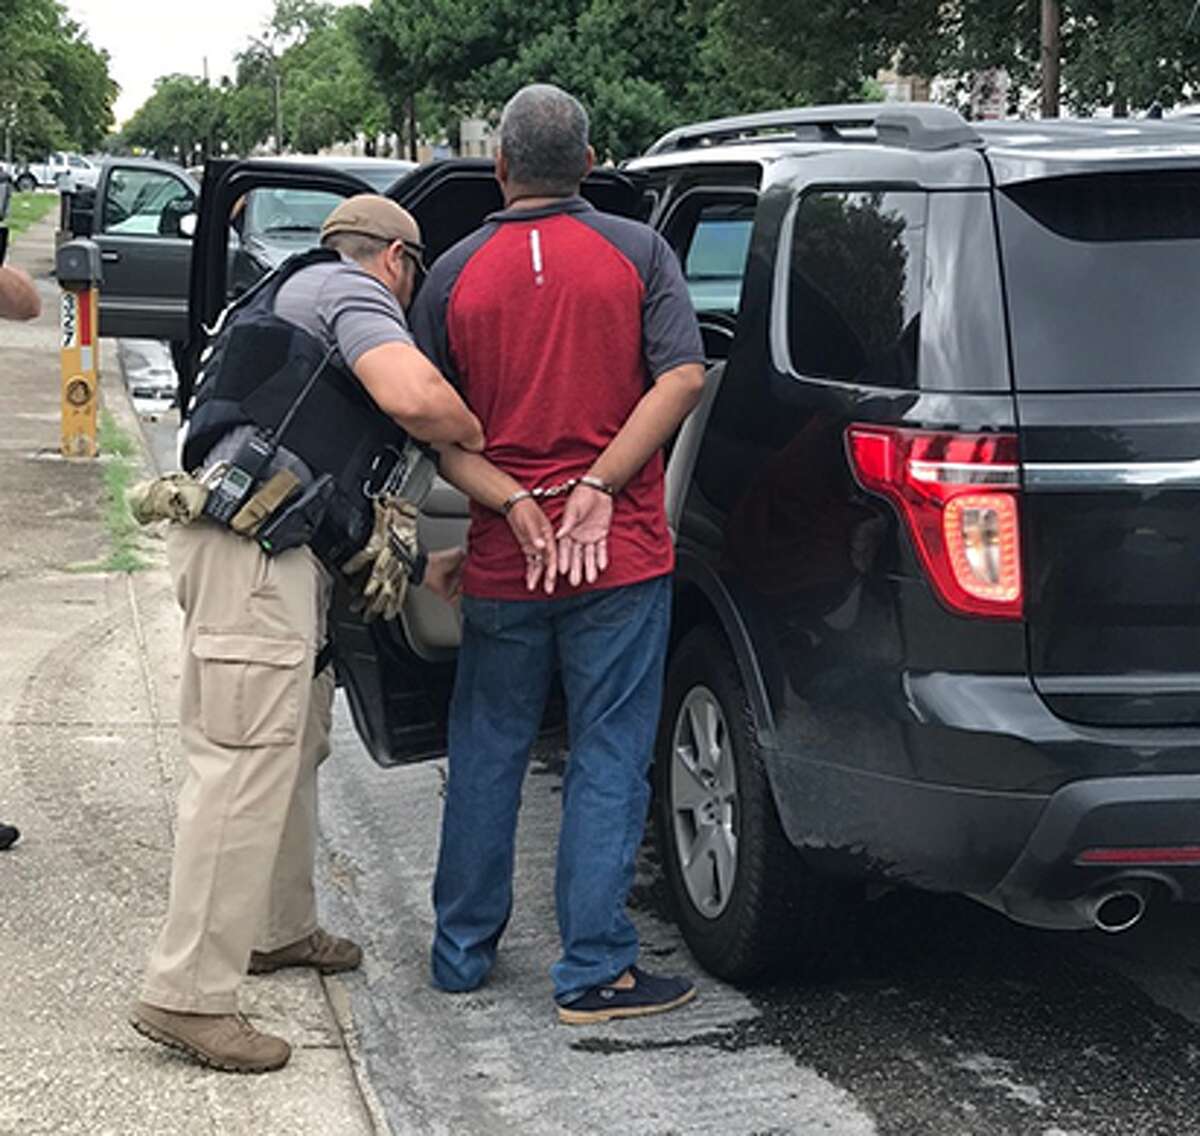 ICE agents arrested 52 undocumented immigrants in a four-day operation that spanned across South and Central Texas.